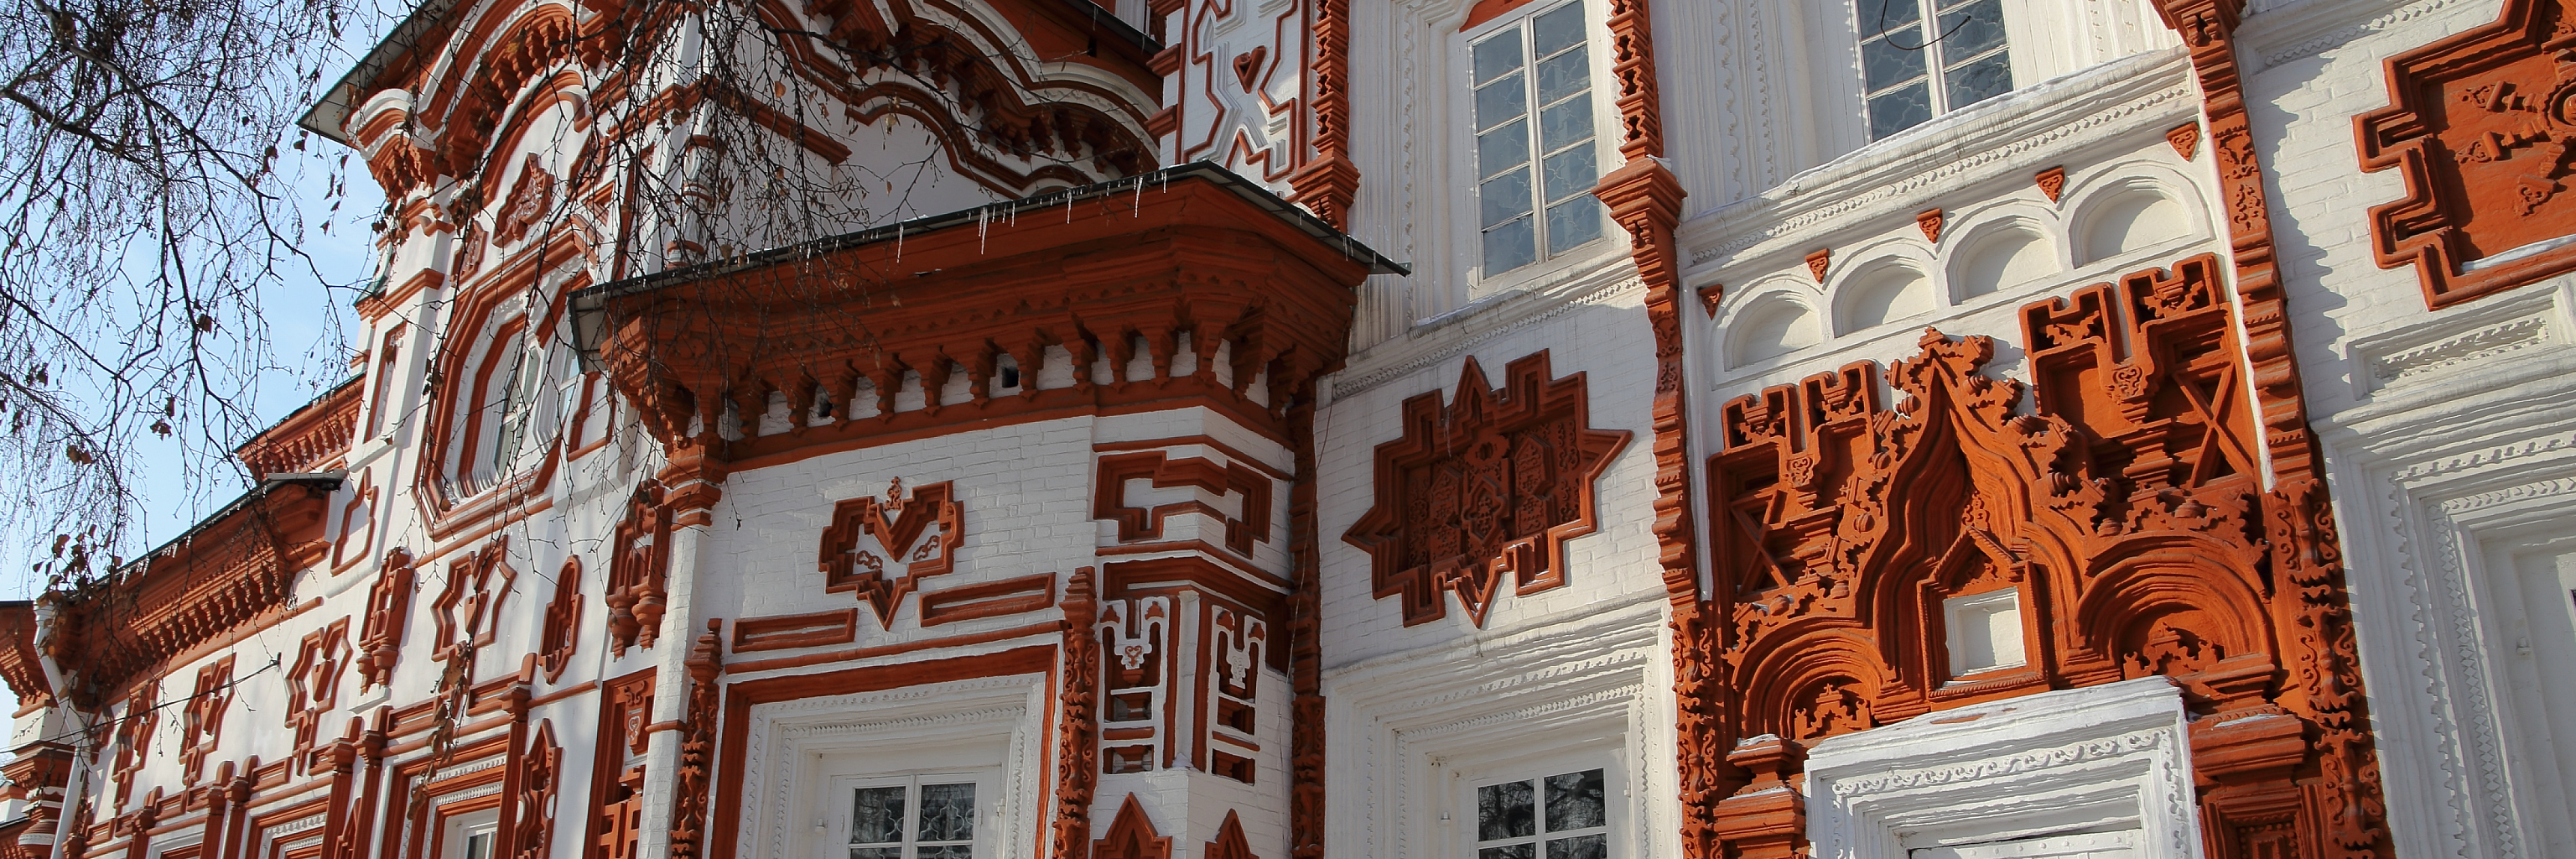 decorative building that is red and white